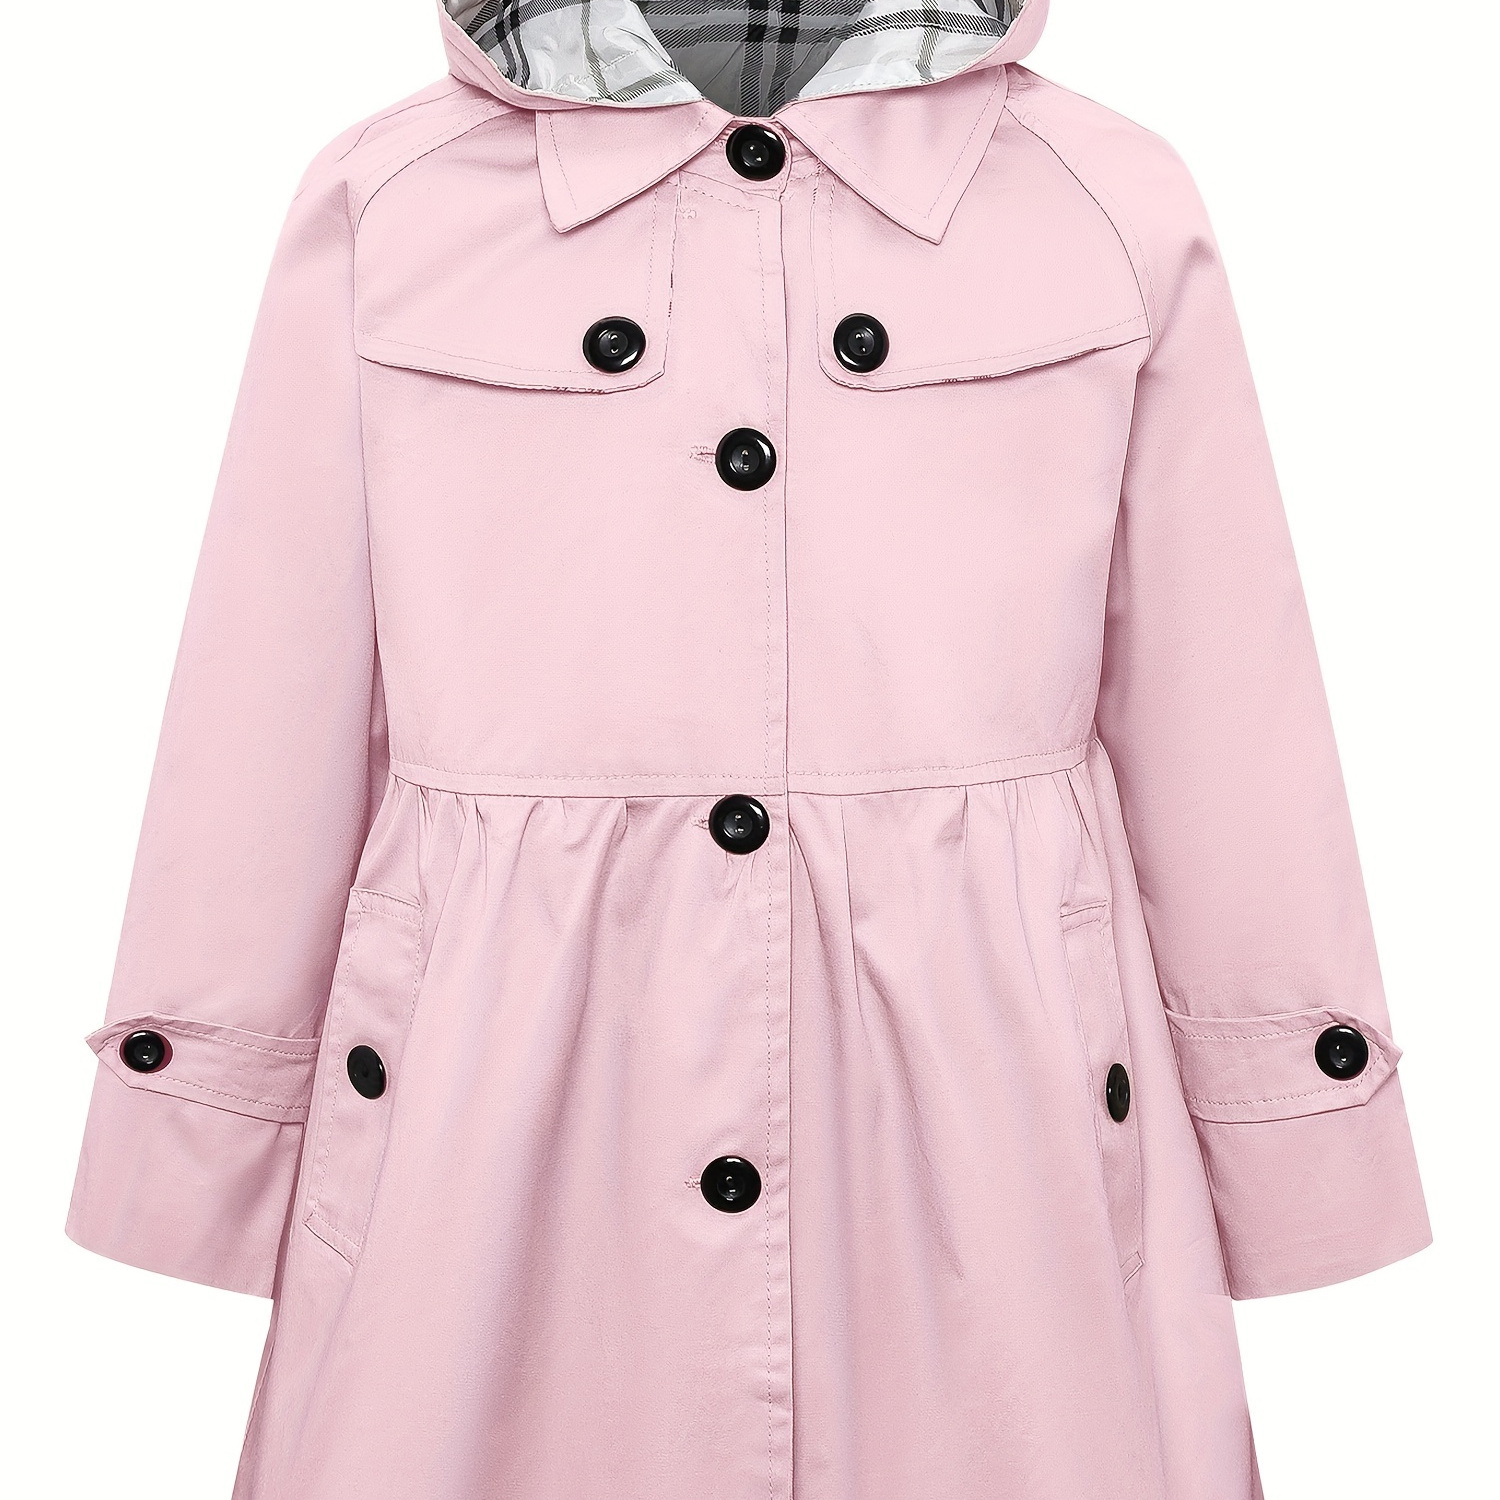 

Girls Hooded Trench Coat Solid Color Single Breasted Outwear Mid-length Dress Coats With Pockets